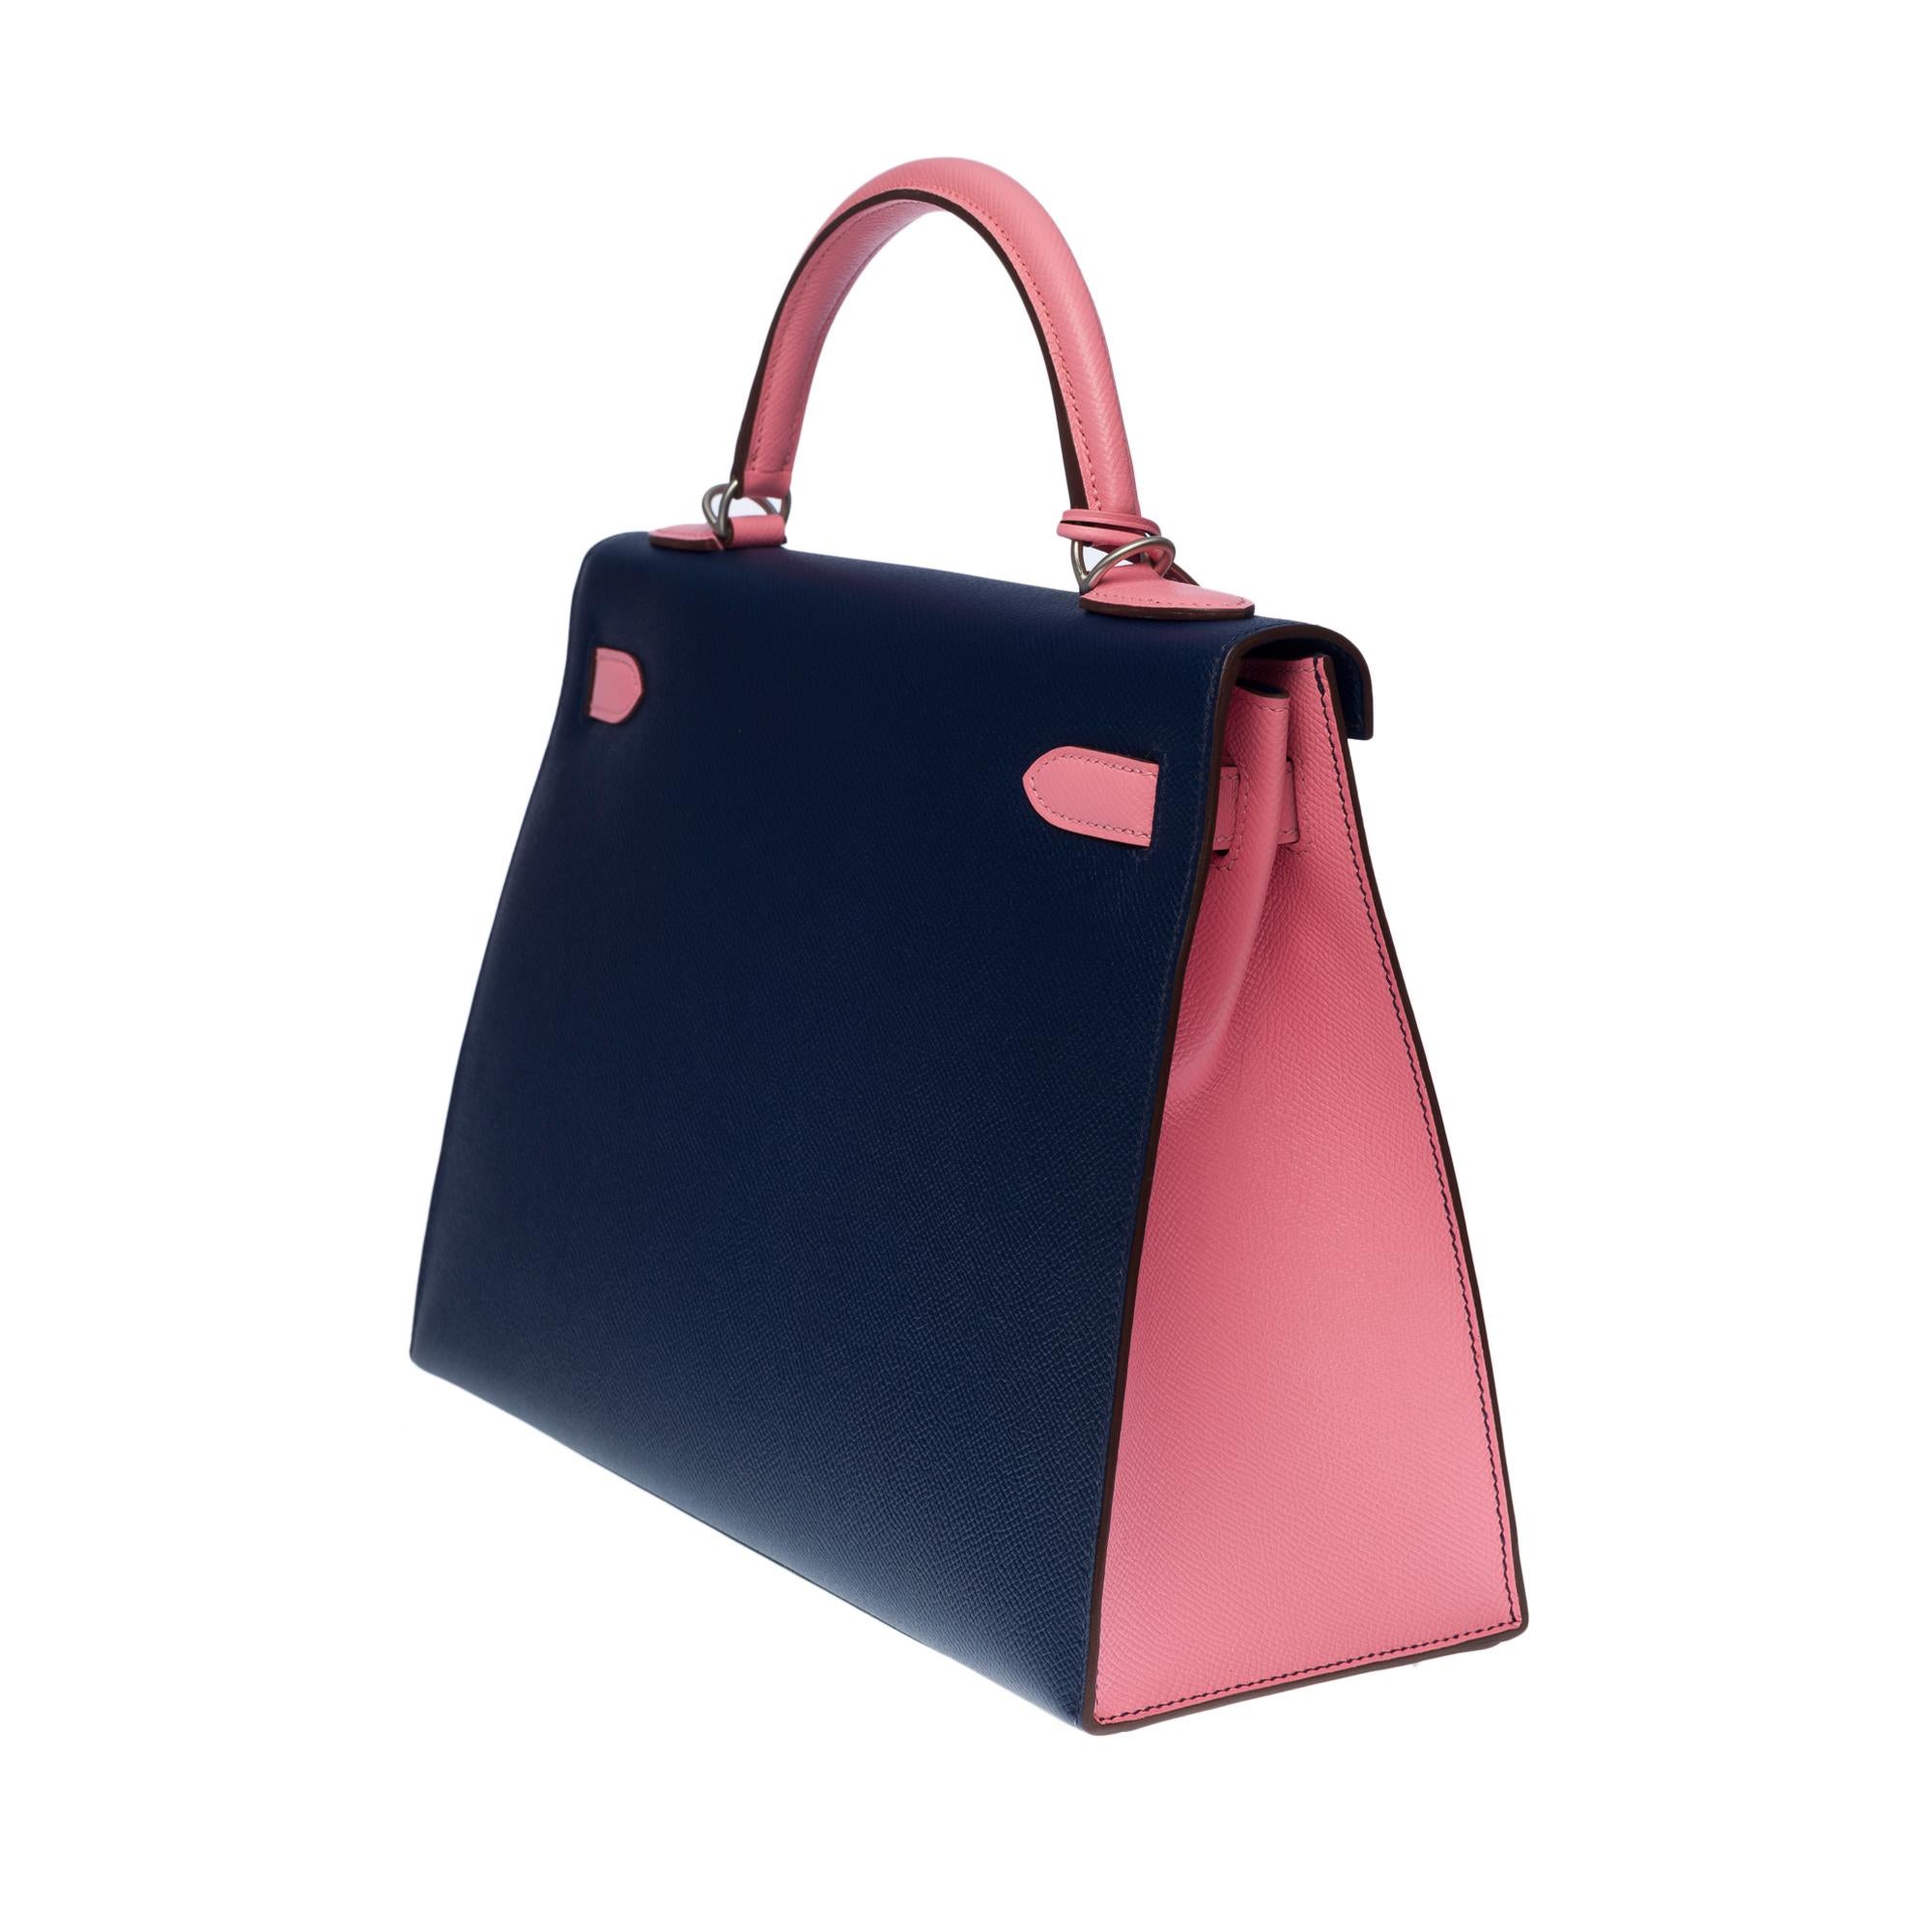 Hermès Kelly 32 sellier Special Order (HSS) in Pink and Blue Epsom leather, BSHW 1